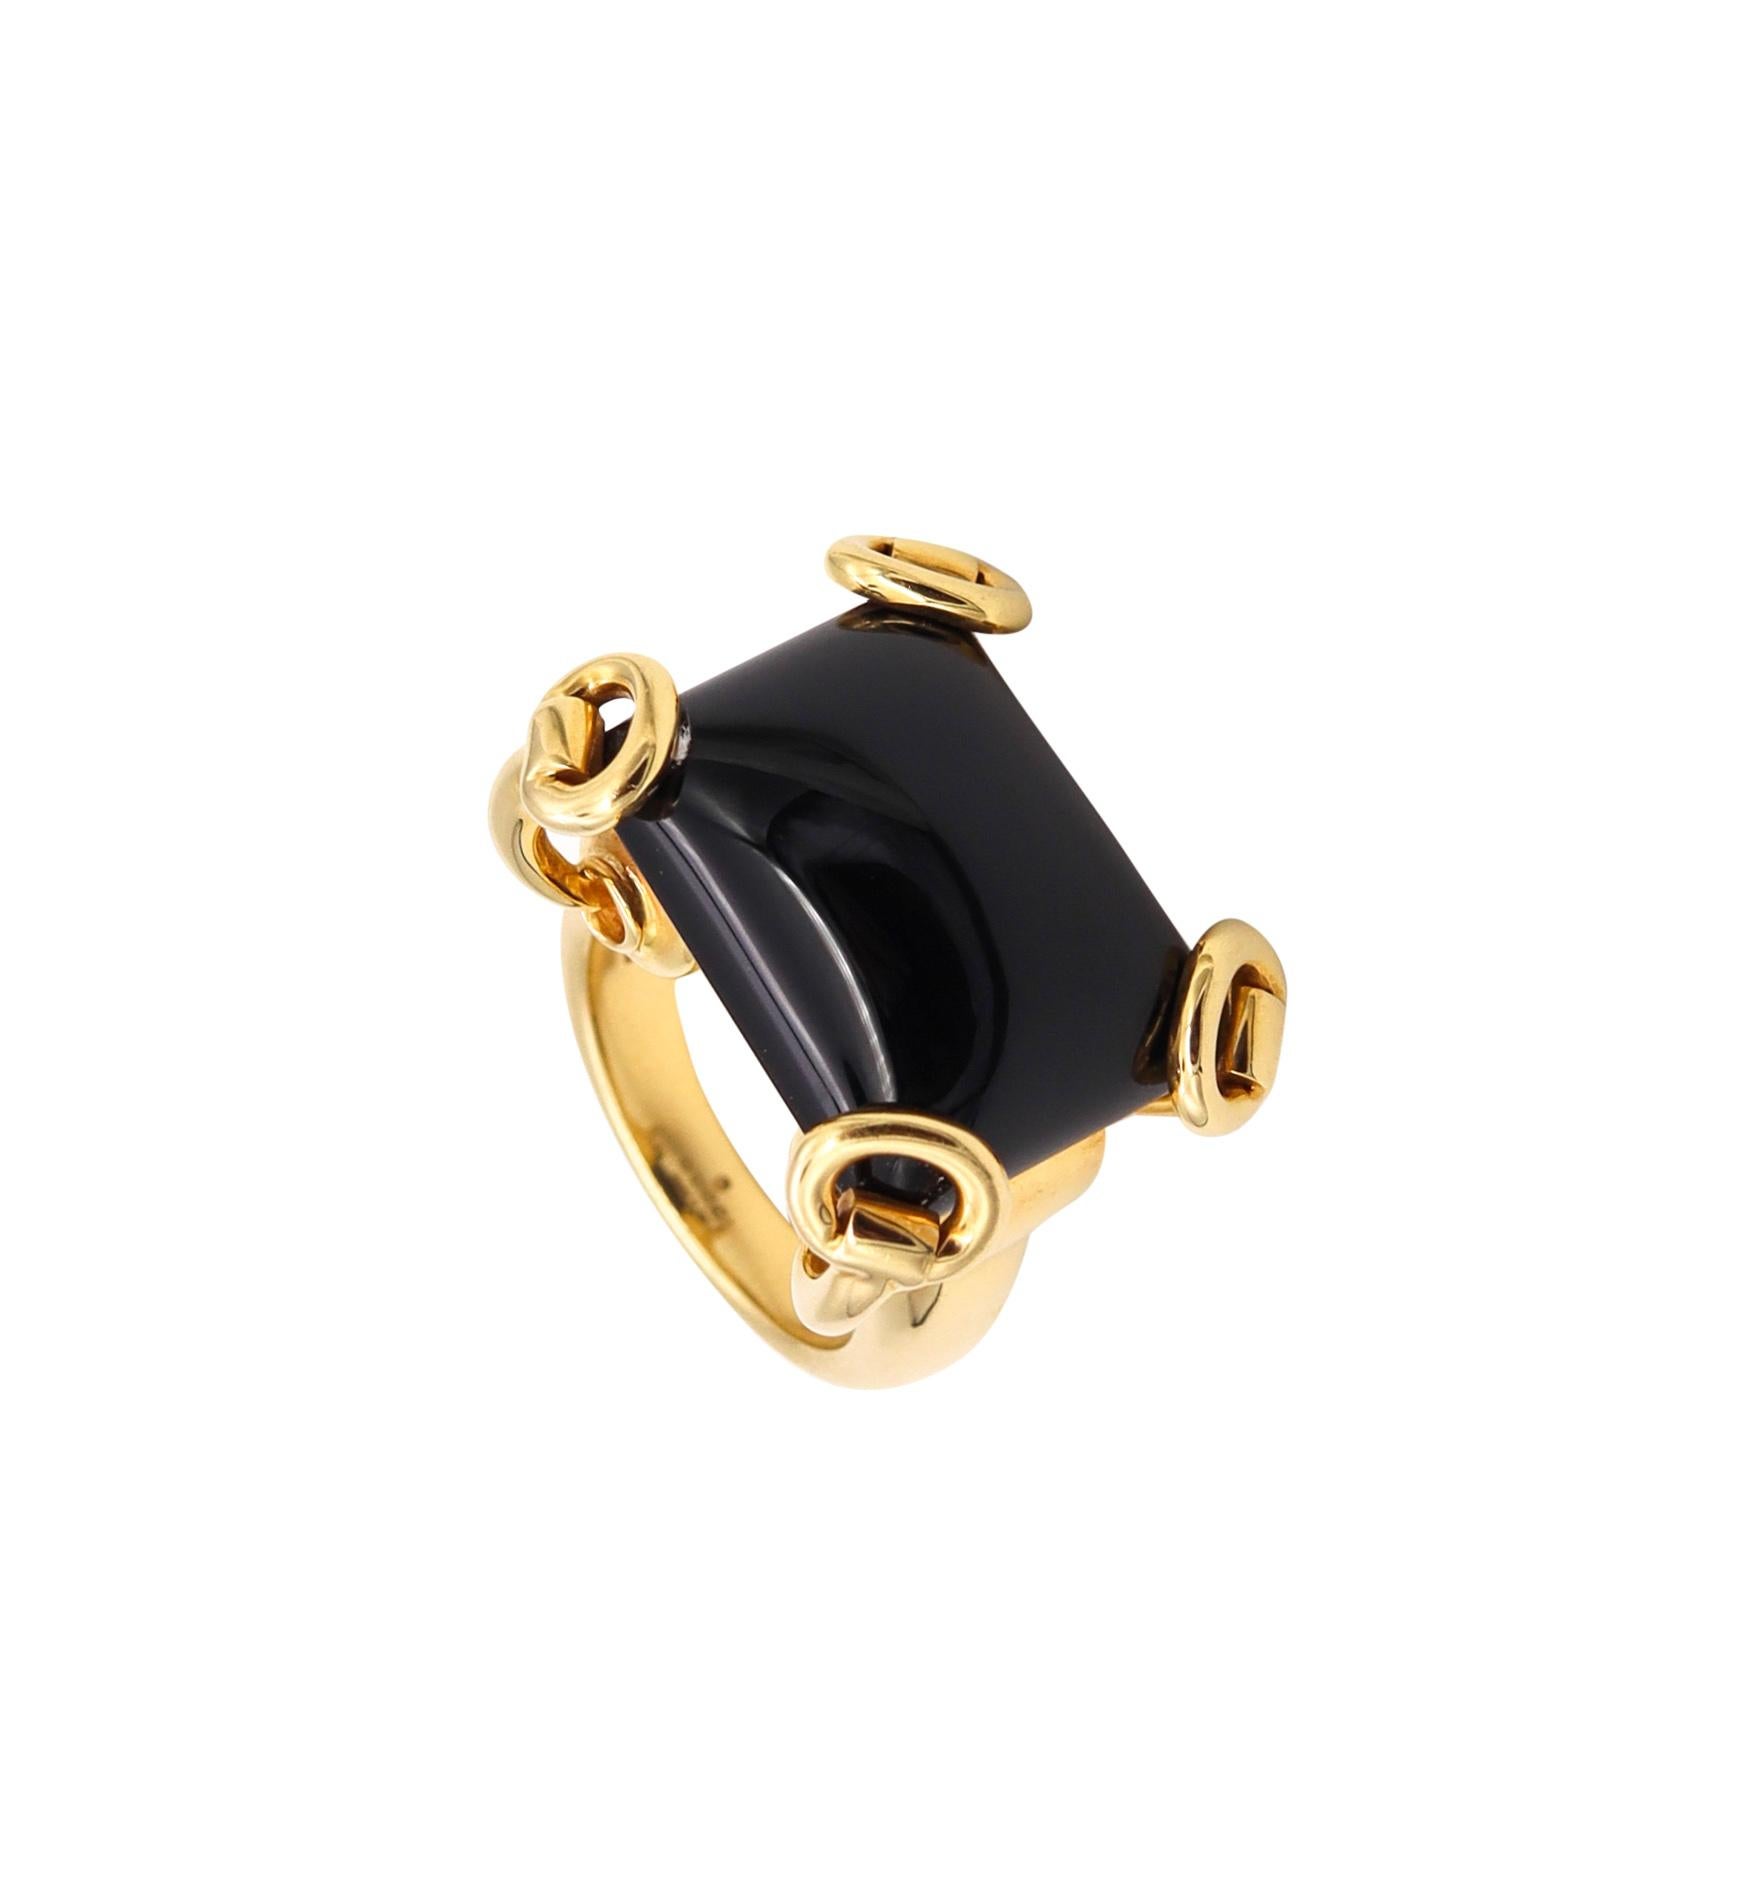 Gucci Milano Horsebit Cocktail Ring in 18Kt Yellow Gold with 26 Cts Black Onyx 2